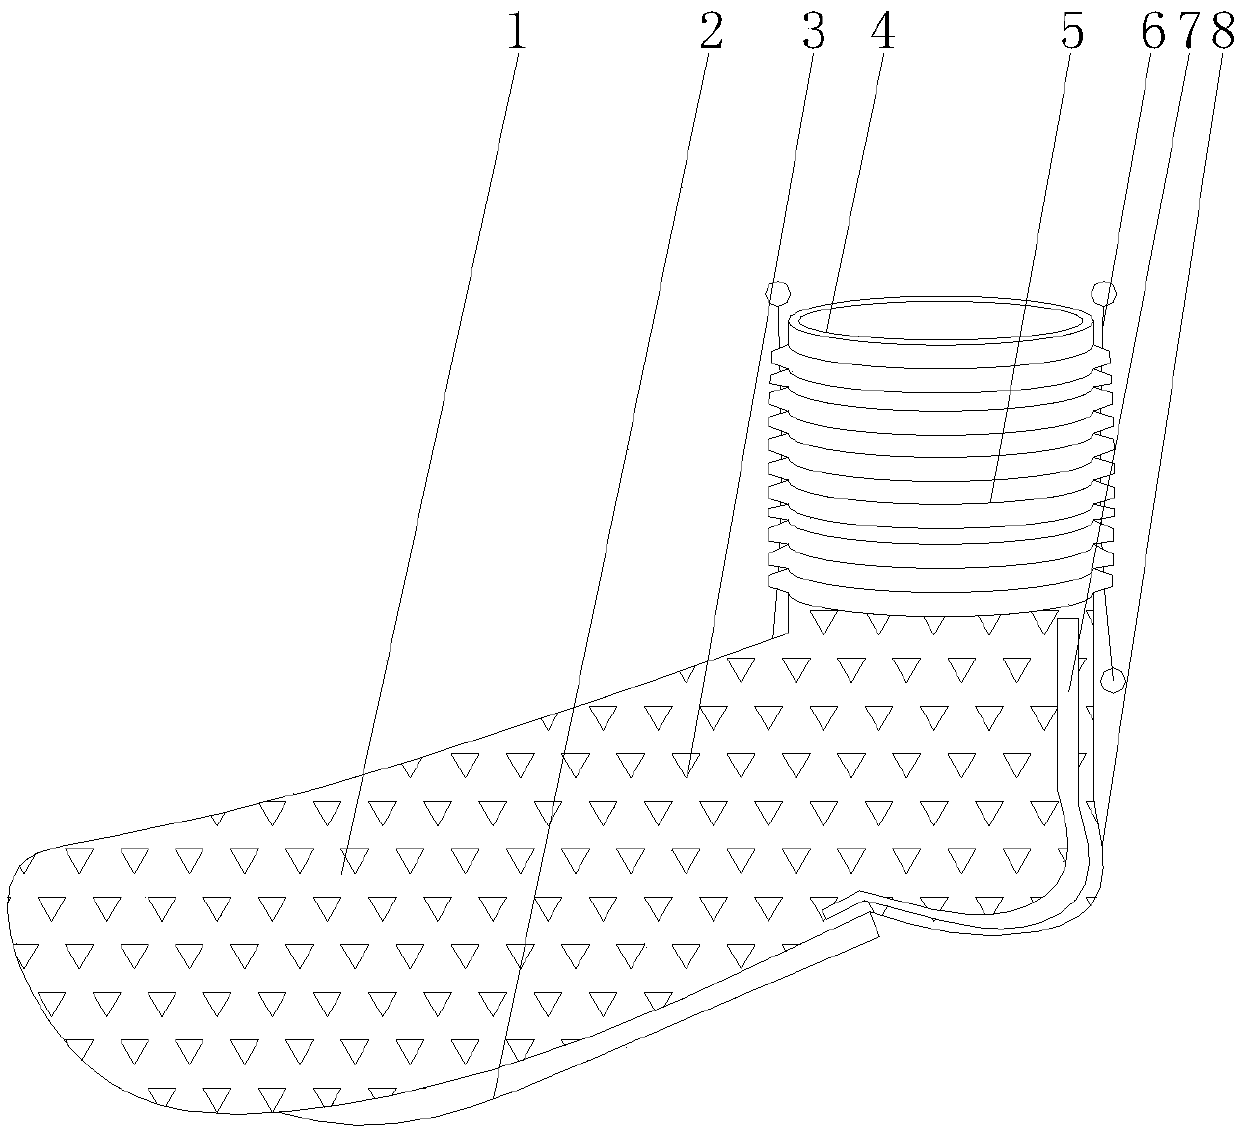 High-wear-resistance cotton sock for troops